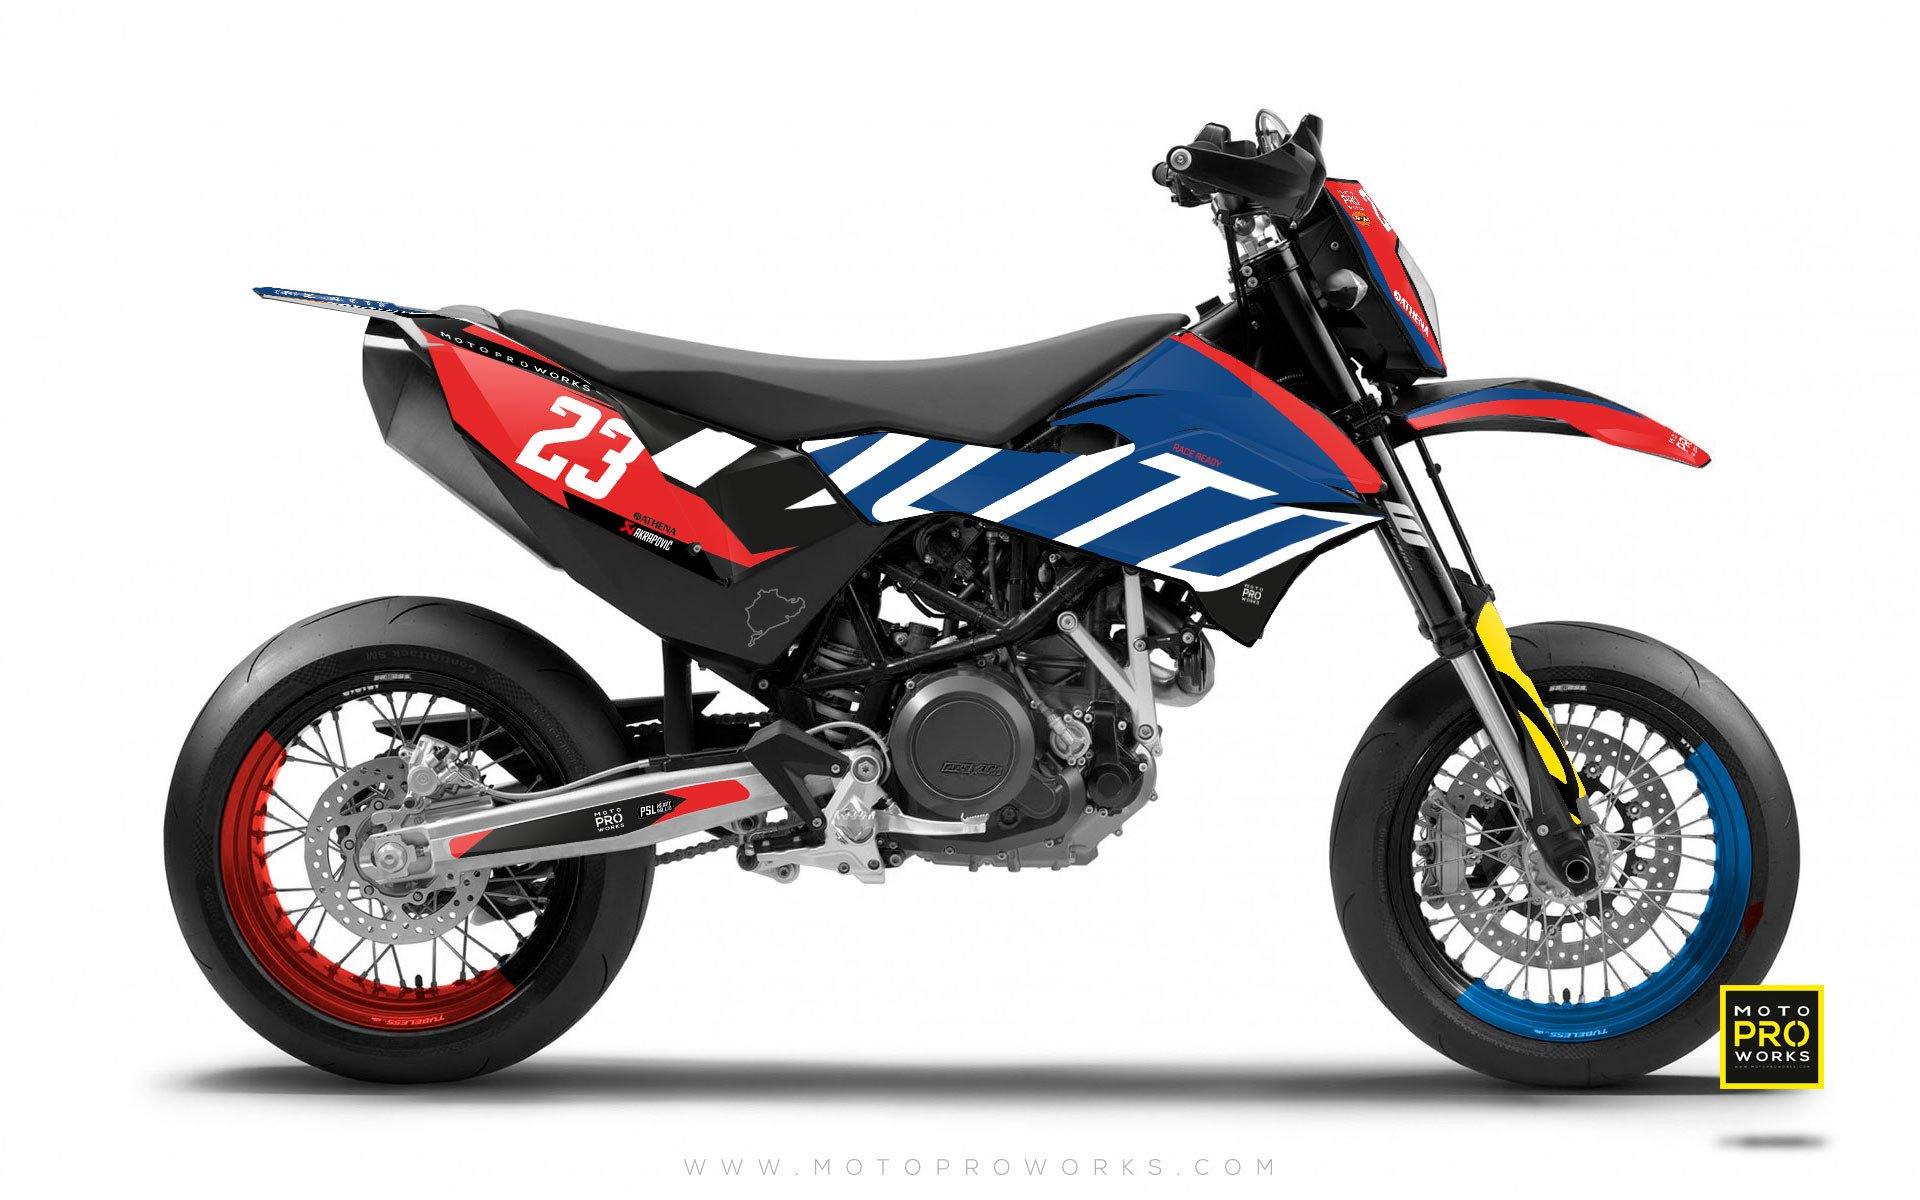 KTM GRAPHIC KIT - "APEX" (classic) - MotoProWorks | Decals and Bike Graphic kit